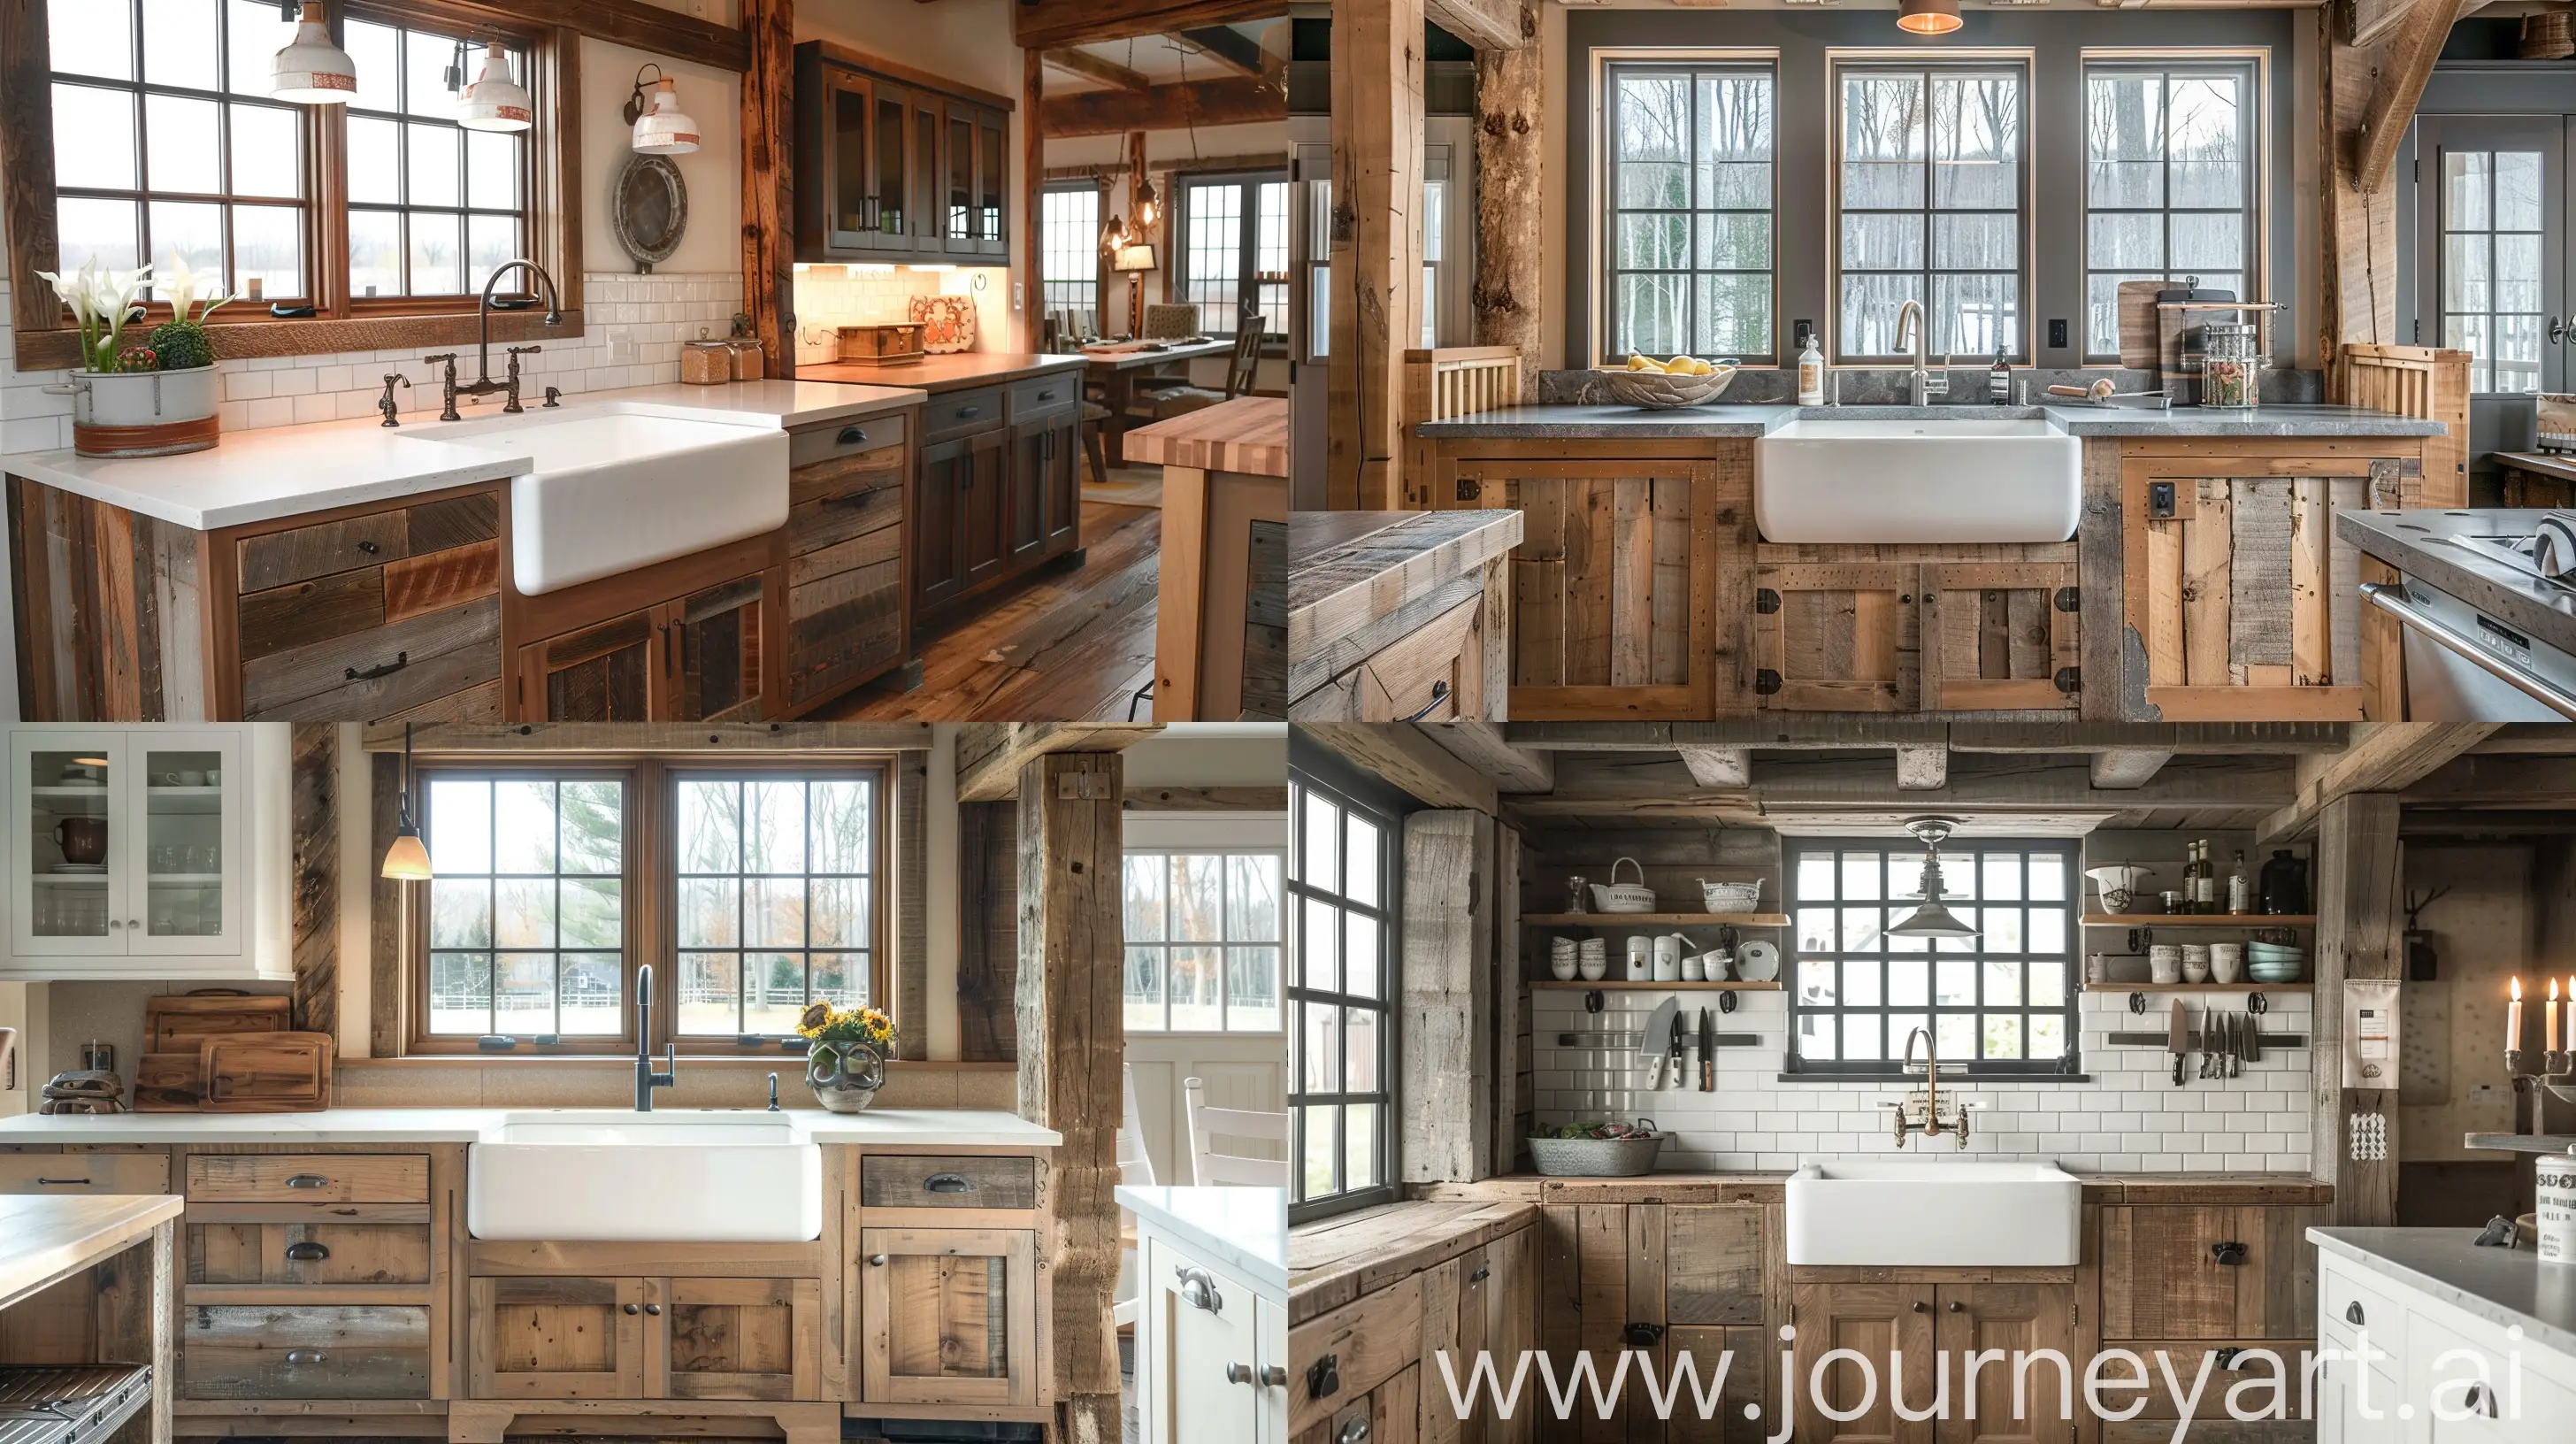 Farmhouse Chic: Kitchen with Rustic Barnwood Cabinets, Farmhouse Sink, and Exposed Wood Beams. --ar 16:9